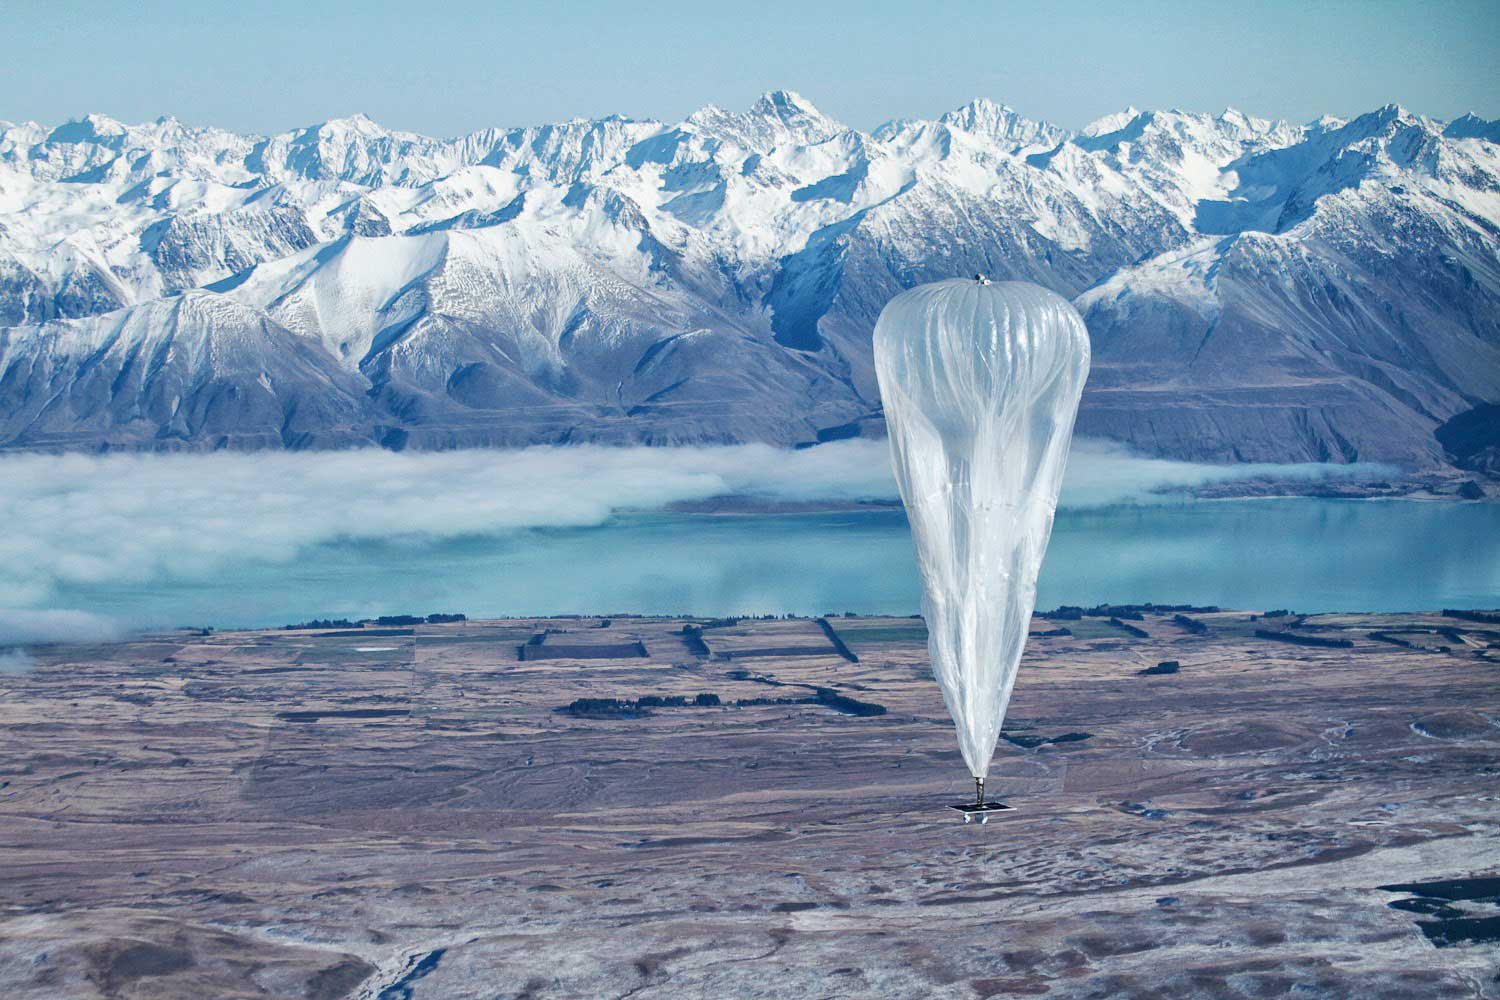 Google has been testing balloons which sail into the stratosphere and beam Internet down to Earth. (Jon Shenk—AP)